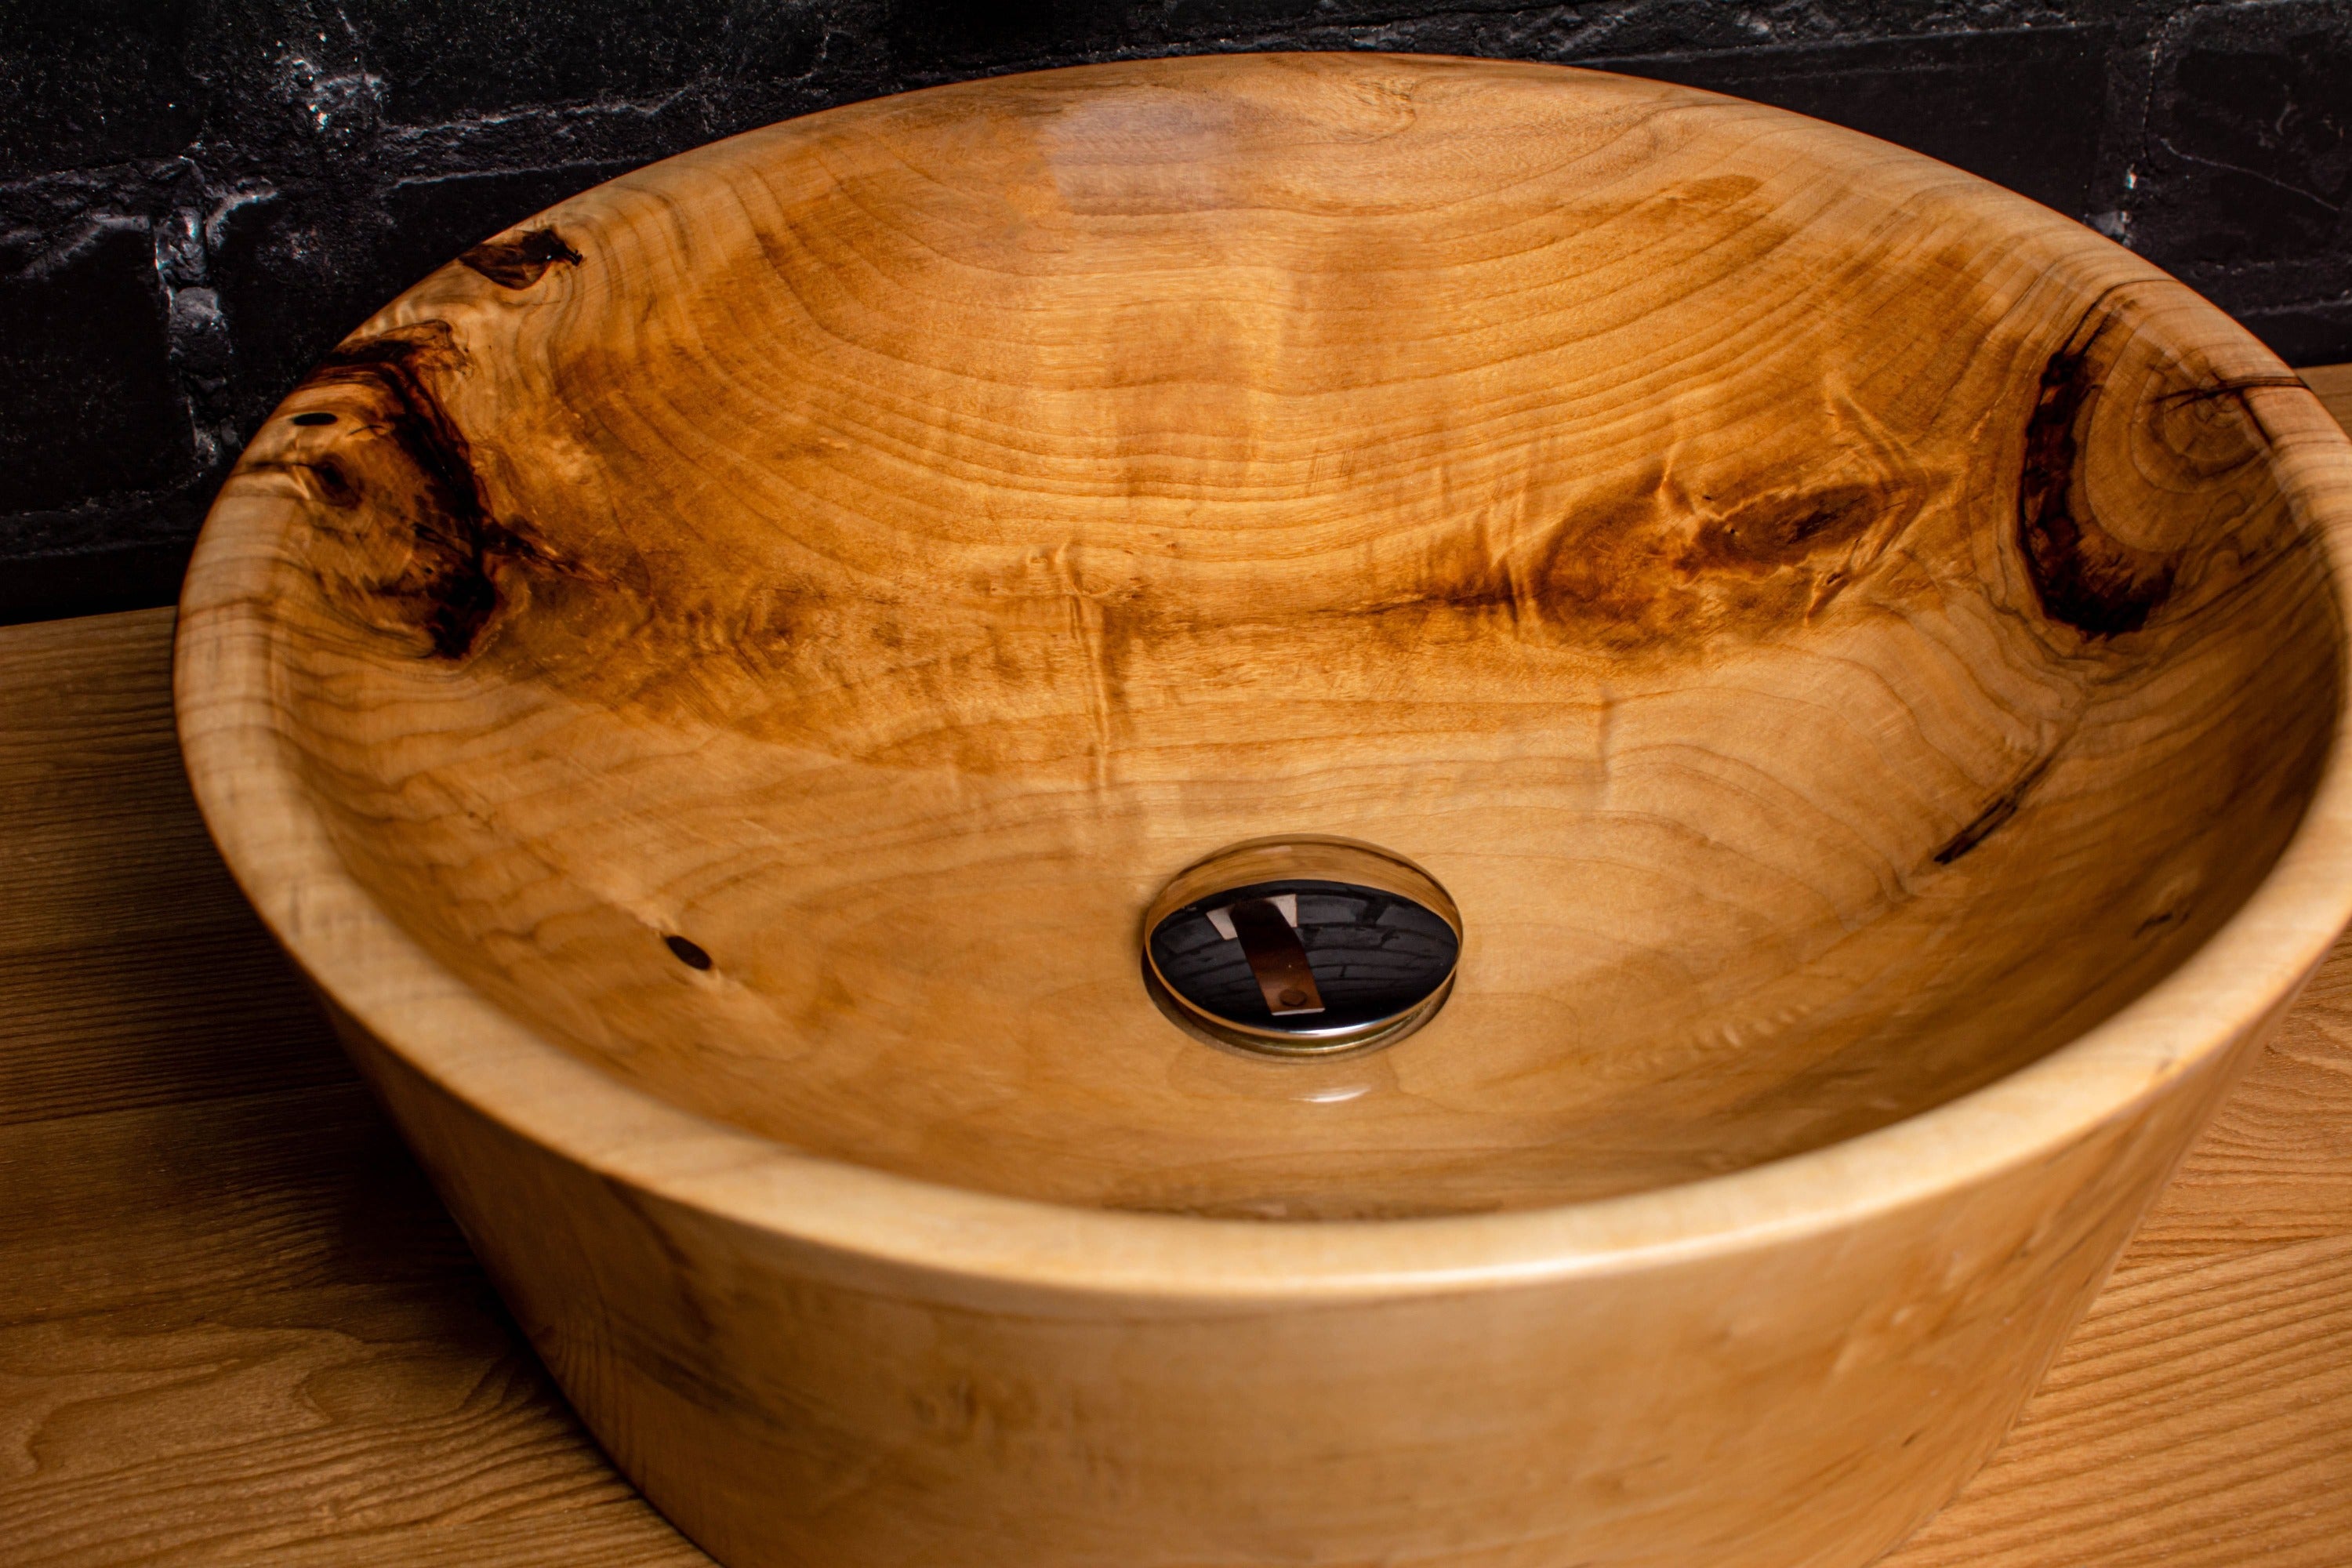 Exquisite Handcrafted Wooden Sink: Elevate Your Bathroom Decor with Timeless Luxury